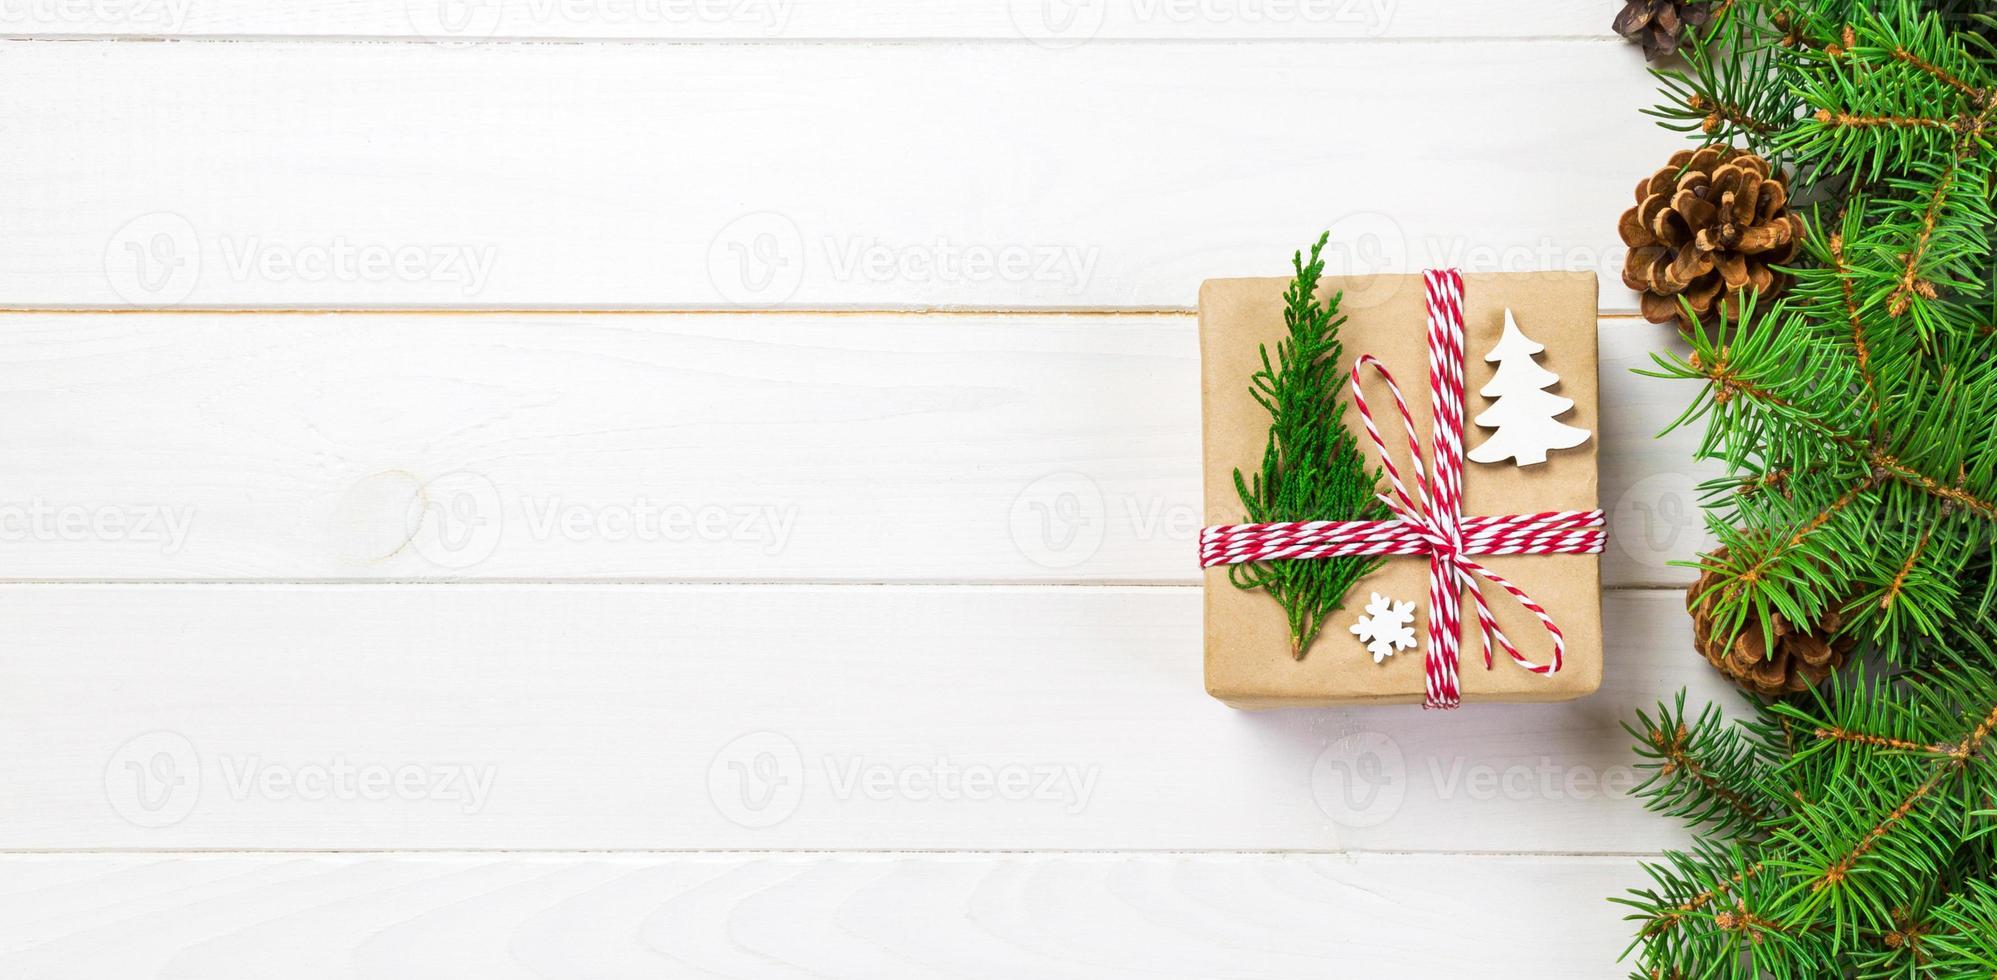 Christmas gift box wrapped in recycled paper, banner with ribbon bow, with ribbon on rustic background. Holiday concept photo